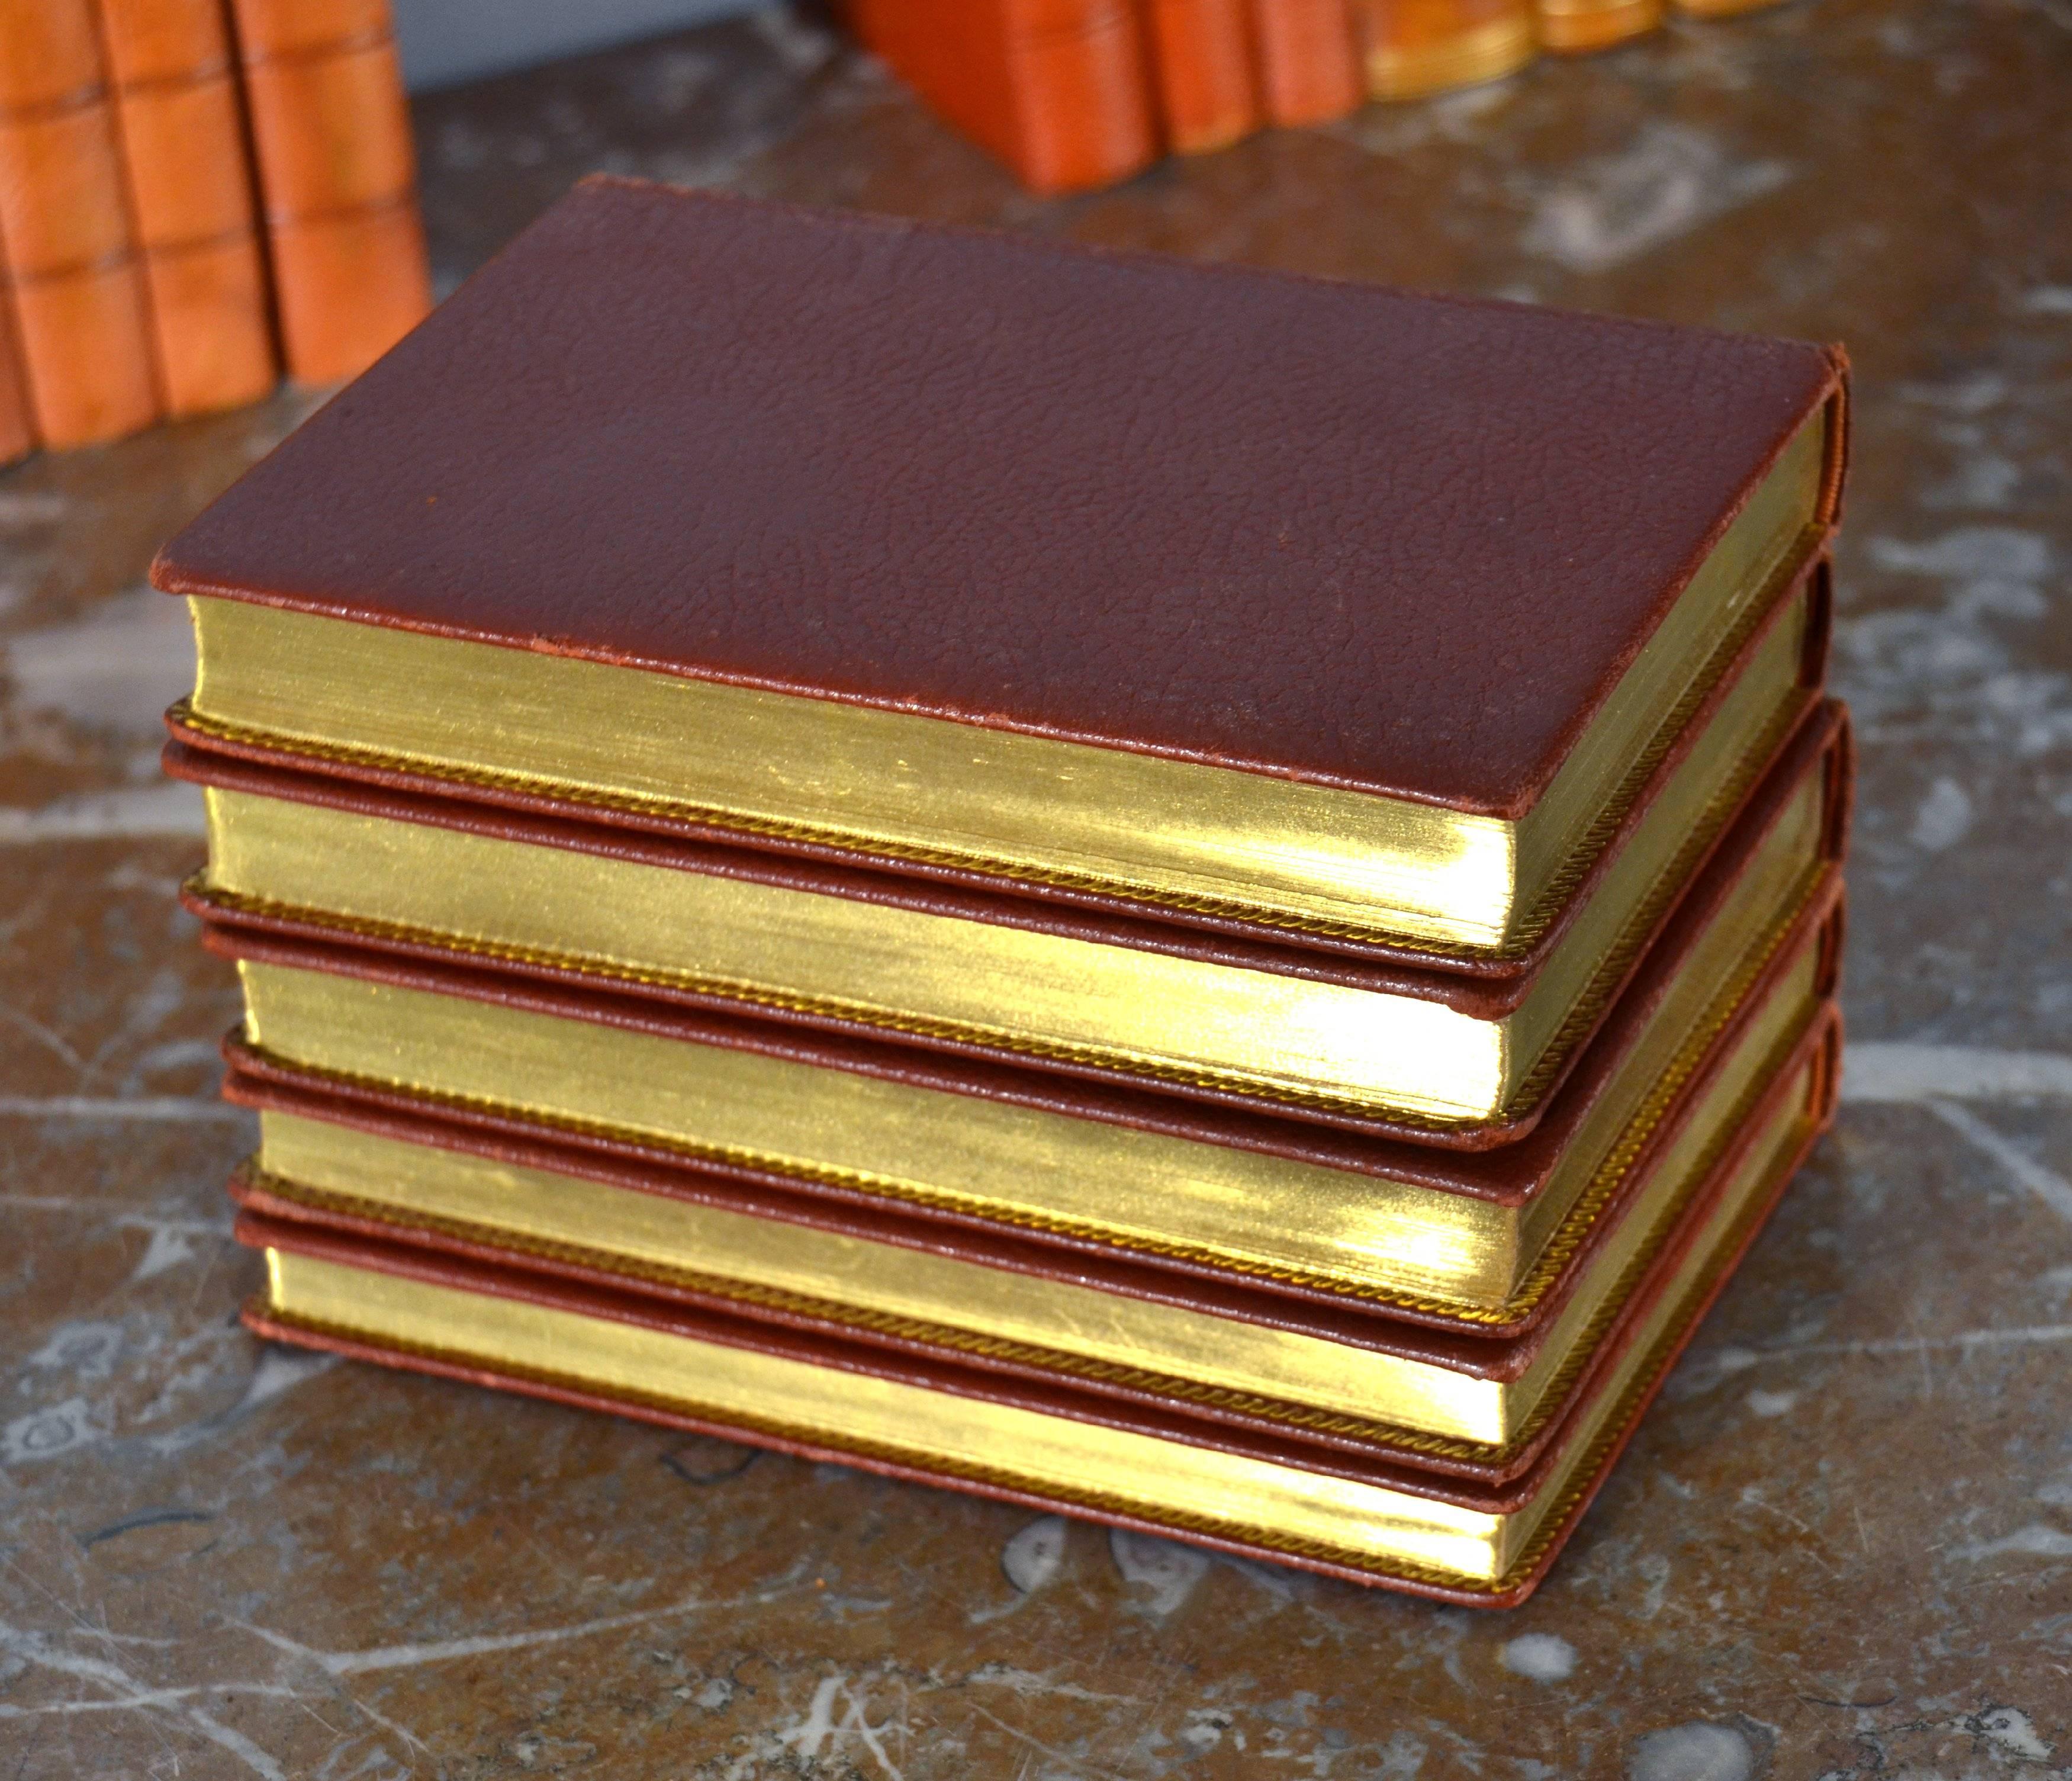 Embossed Collection of Leather Bound Books, Series 116